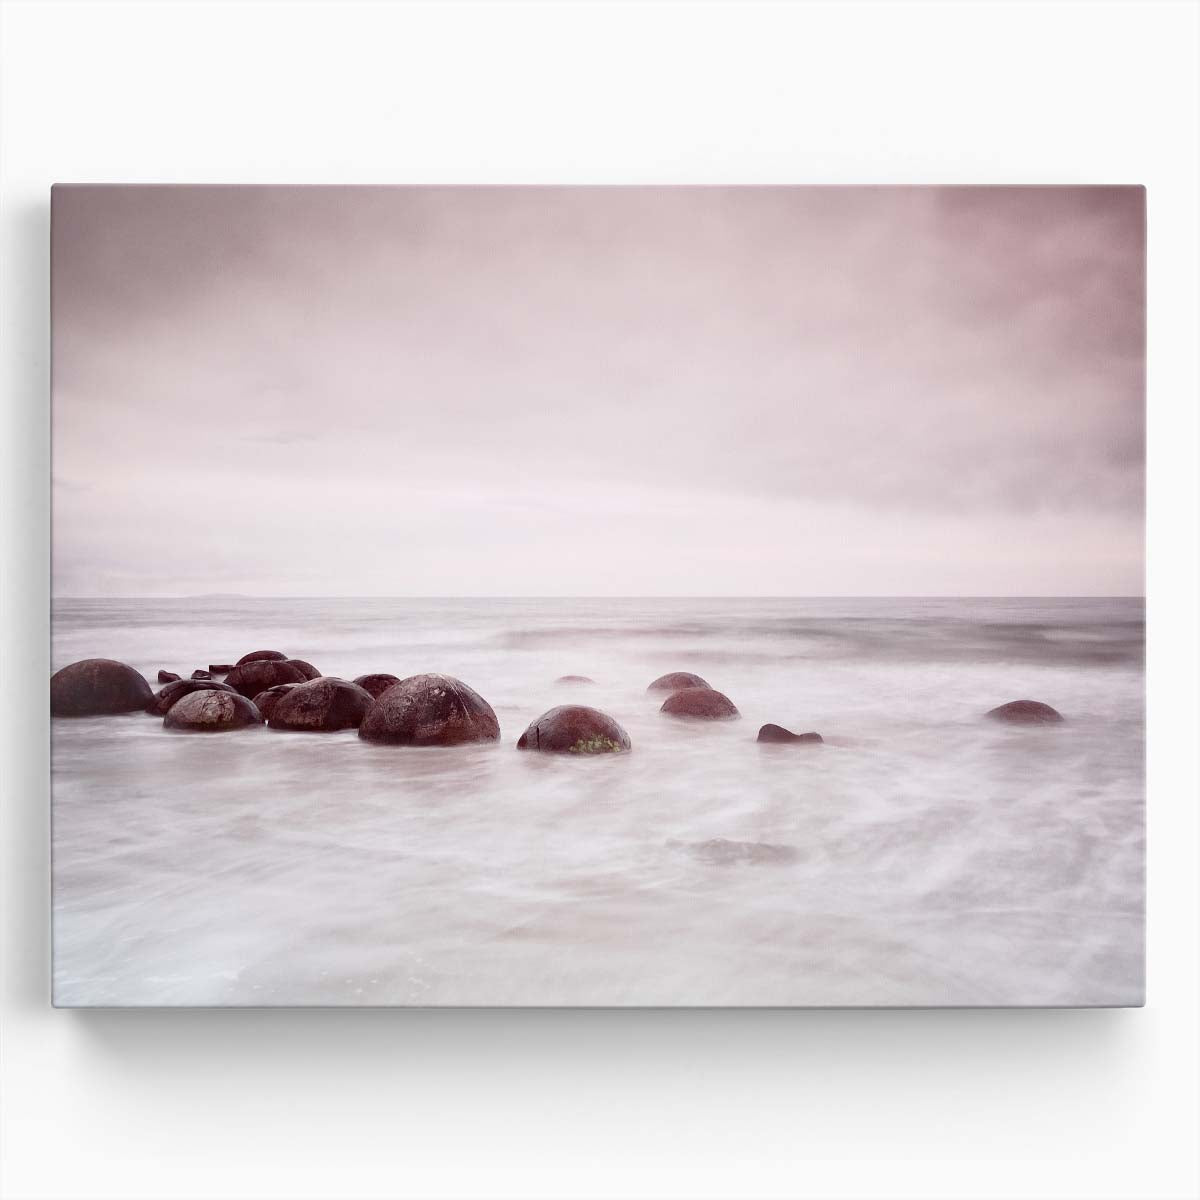 Moeraki Boulders Seascape Serene Long Exposure Photography Wall Art by Luxuriance Designs. Made in USA.